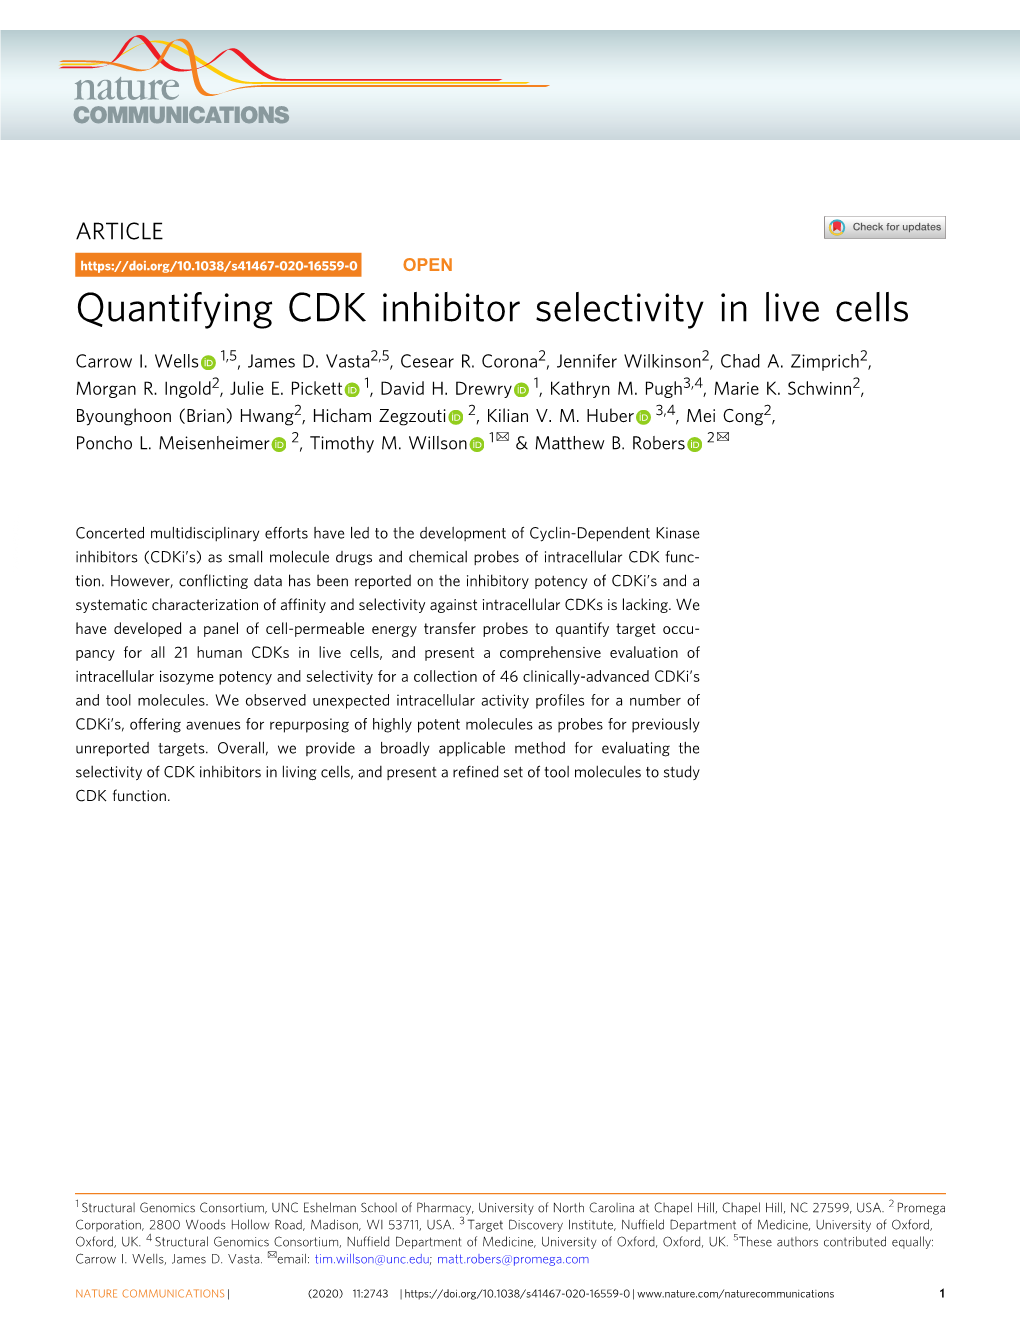 Quantifying CDK Inhibitor Selectivity in Live Cells